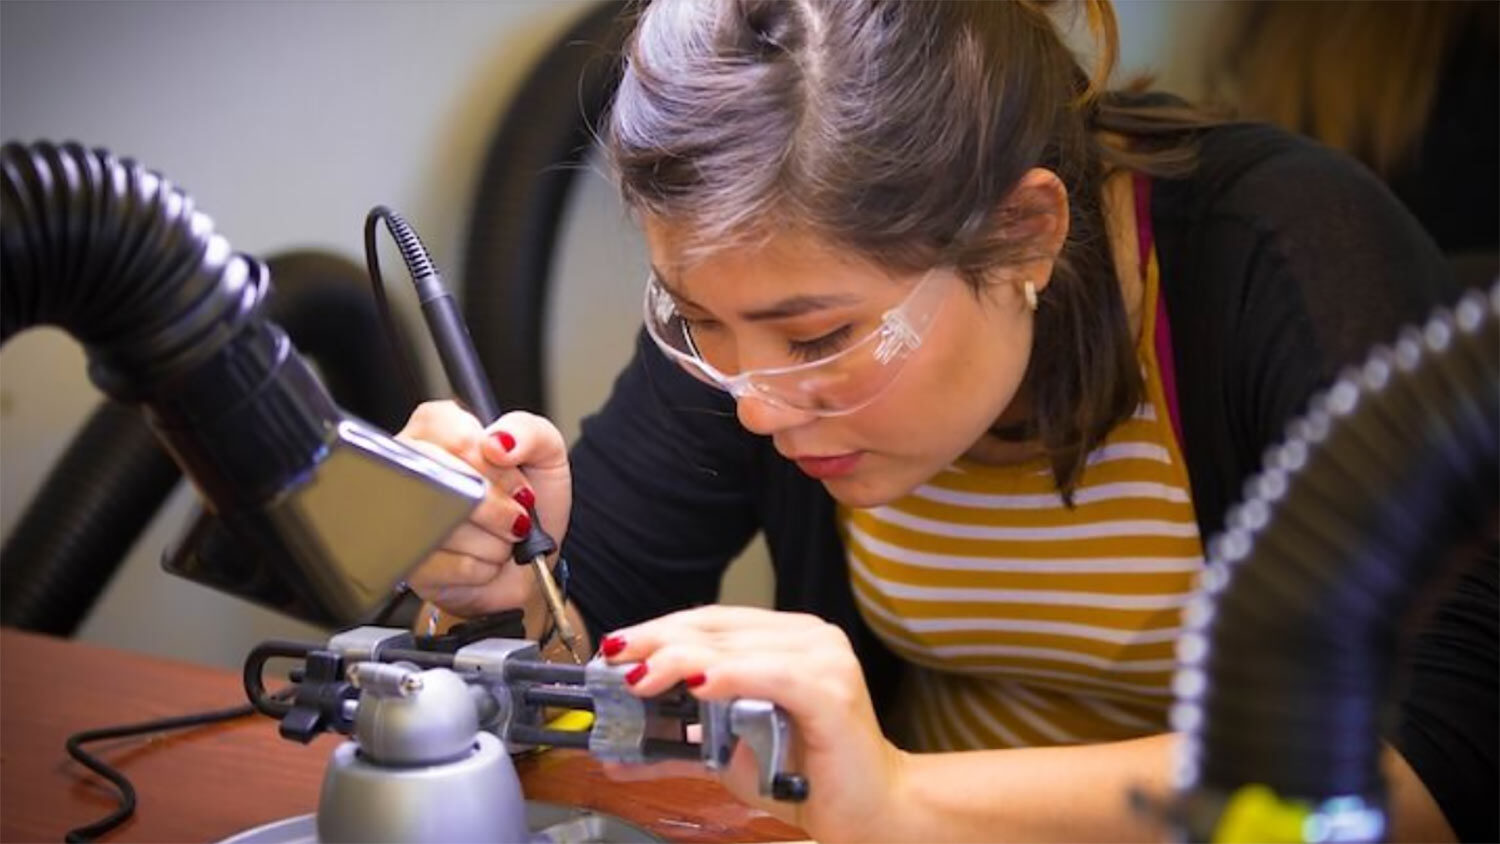 A student wearing safety goggles solders a piece of metal.